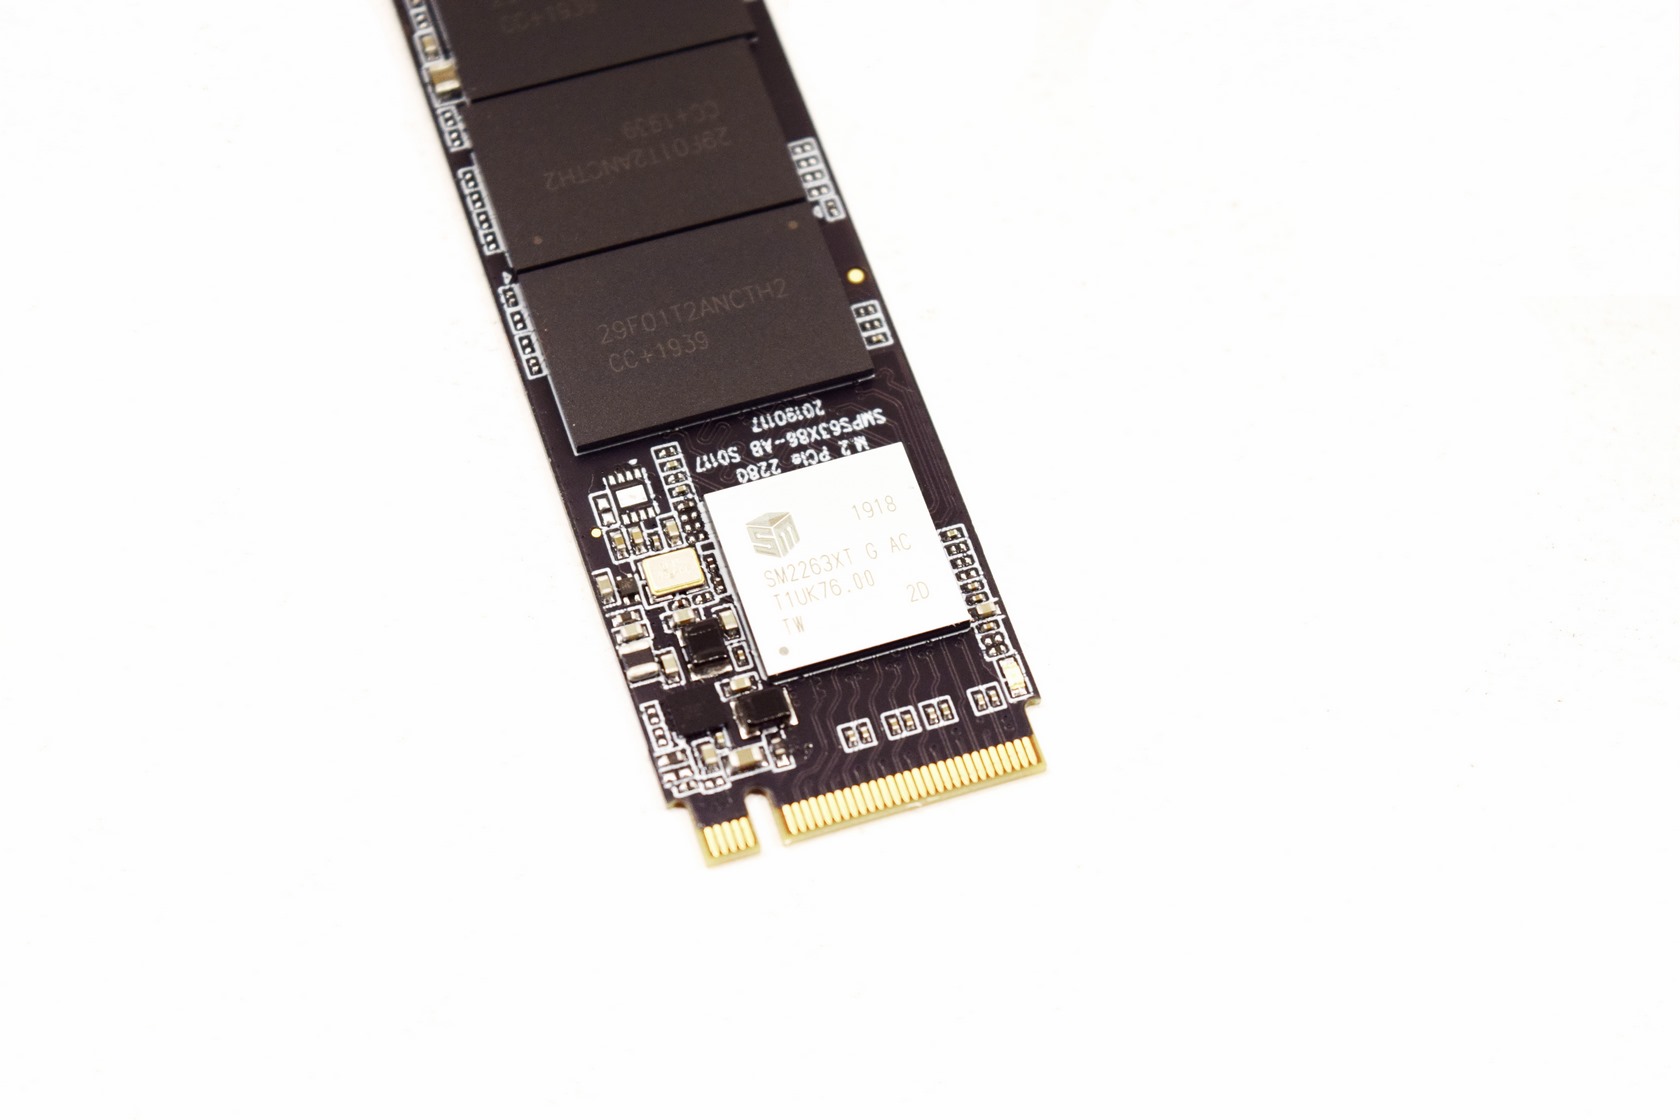 Silicon Power P34A60 1TB - M.2 SSD Review